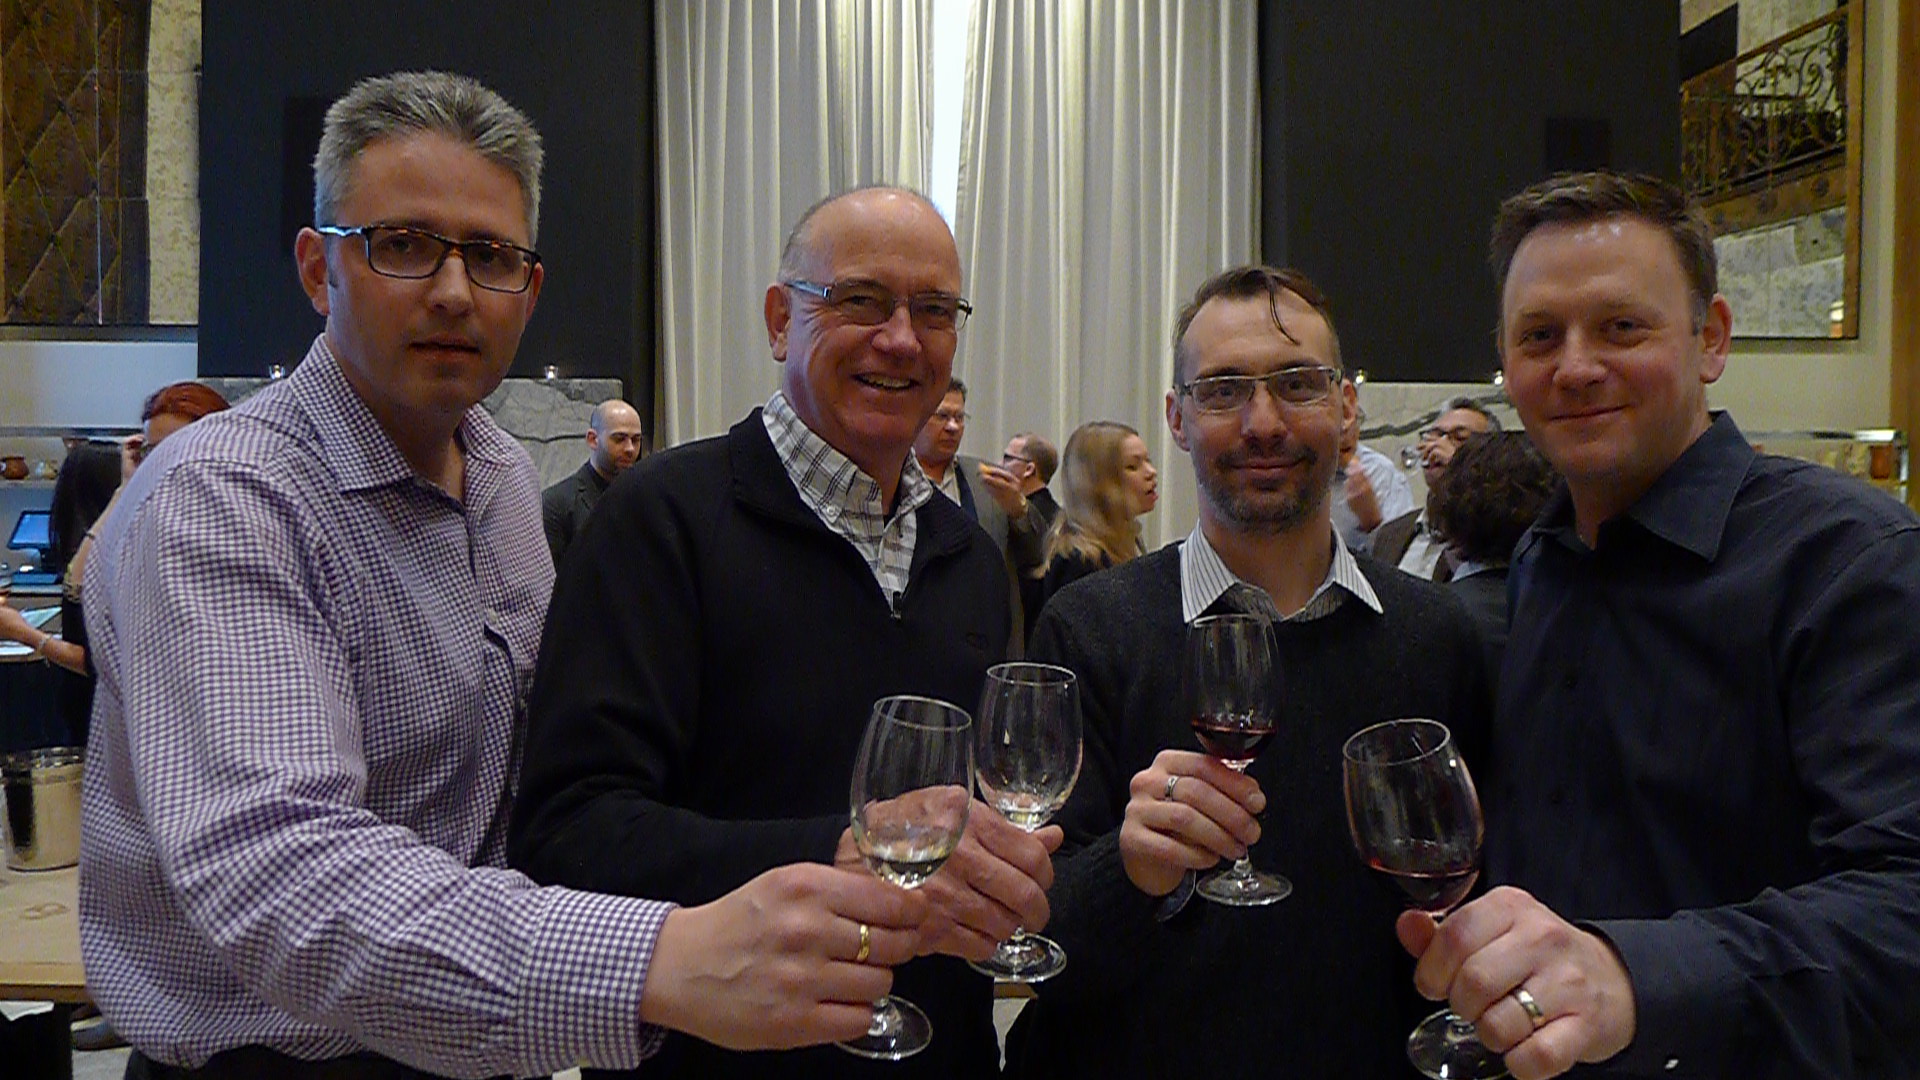 Steve Stoddart (Rogers and Co.), Steven Campbell (Lifford Agencies), and Joshua Corea (Archive Wine Bar).